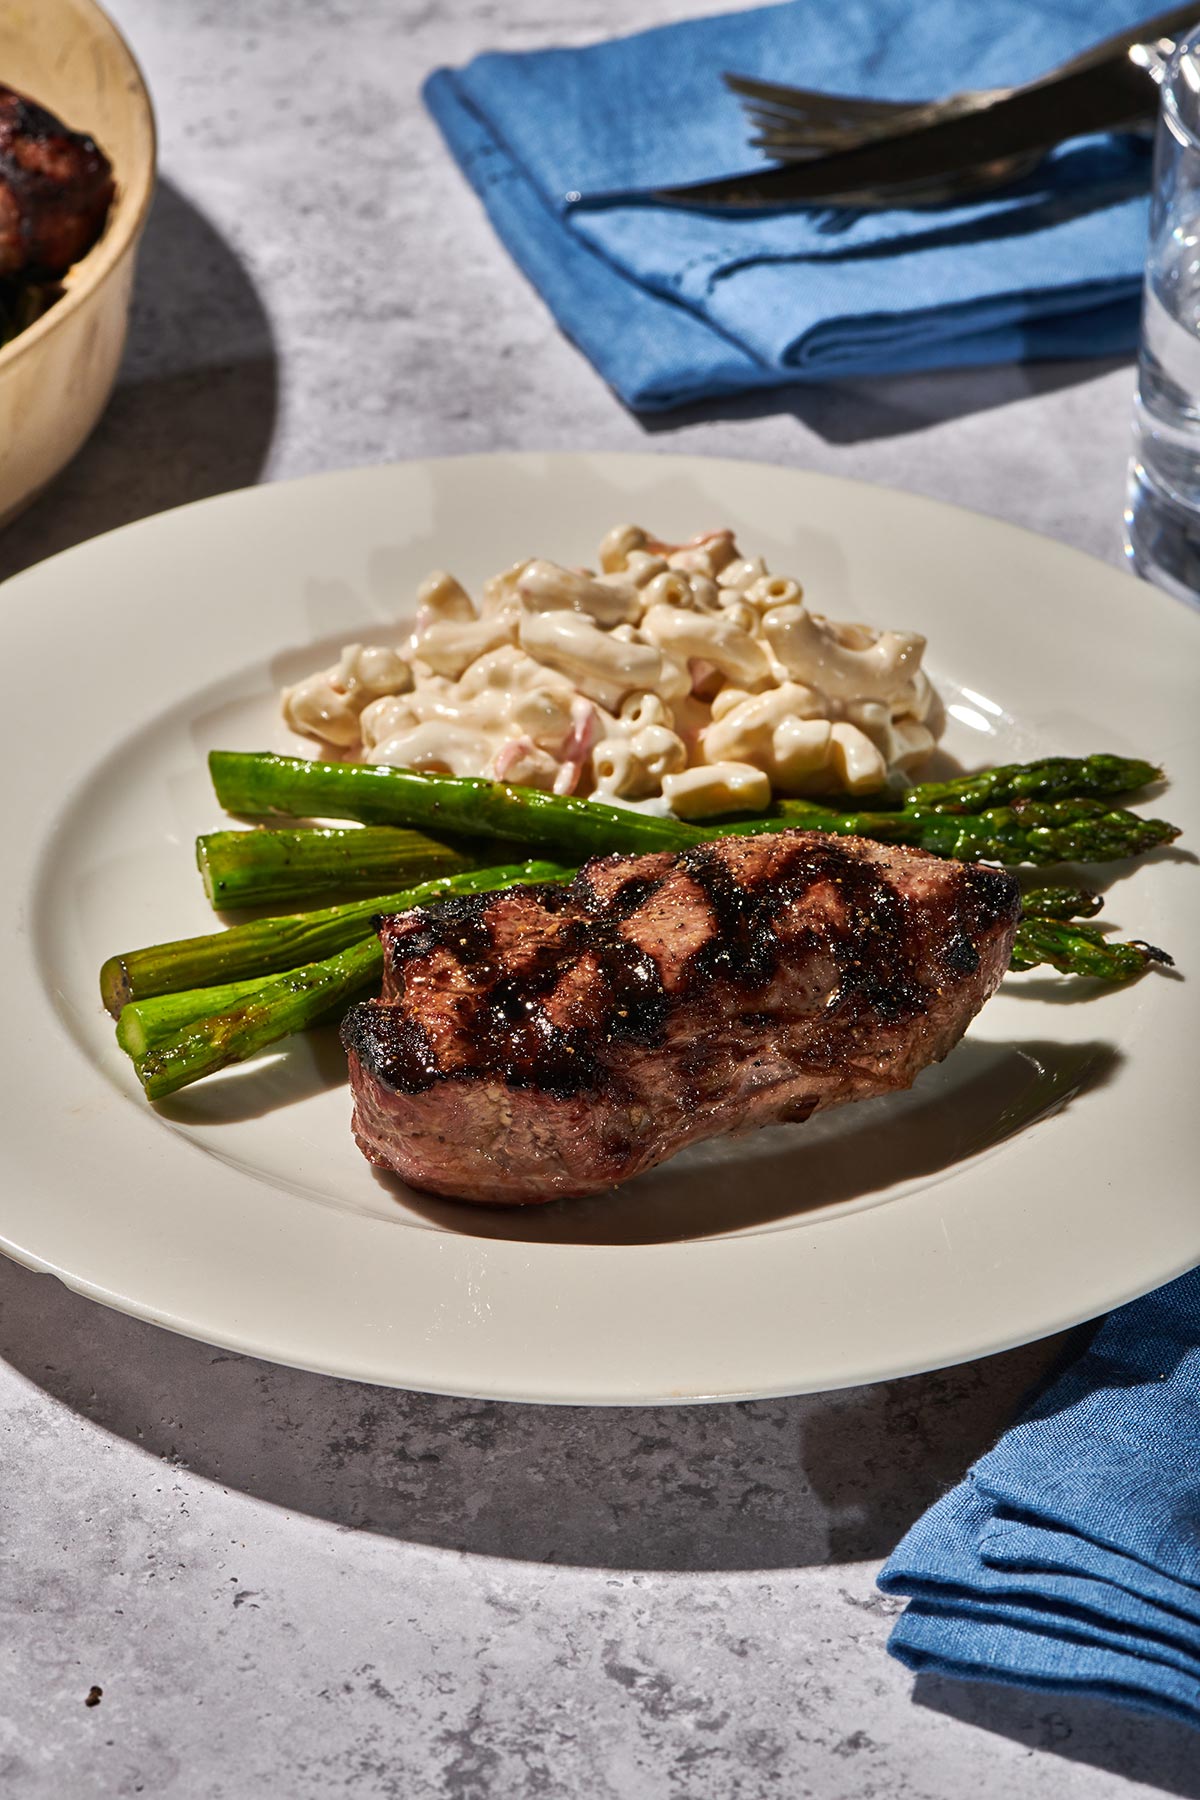 Cookout table with grilled top sirloin steak on plate with asparagus and macaroni salad.